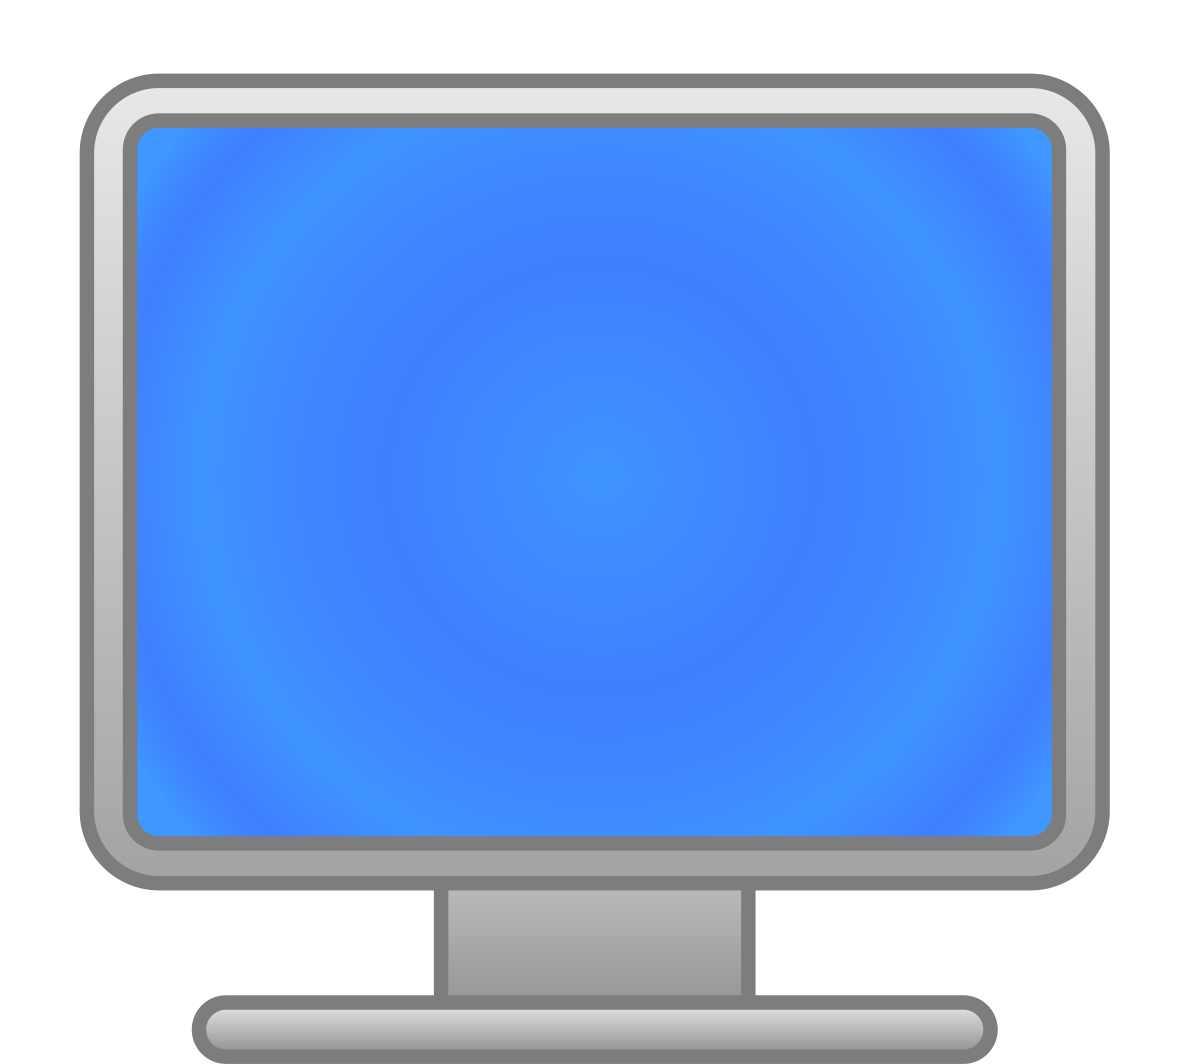 File:Simple Monitor Icon.Svg - Wikimedia Commons